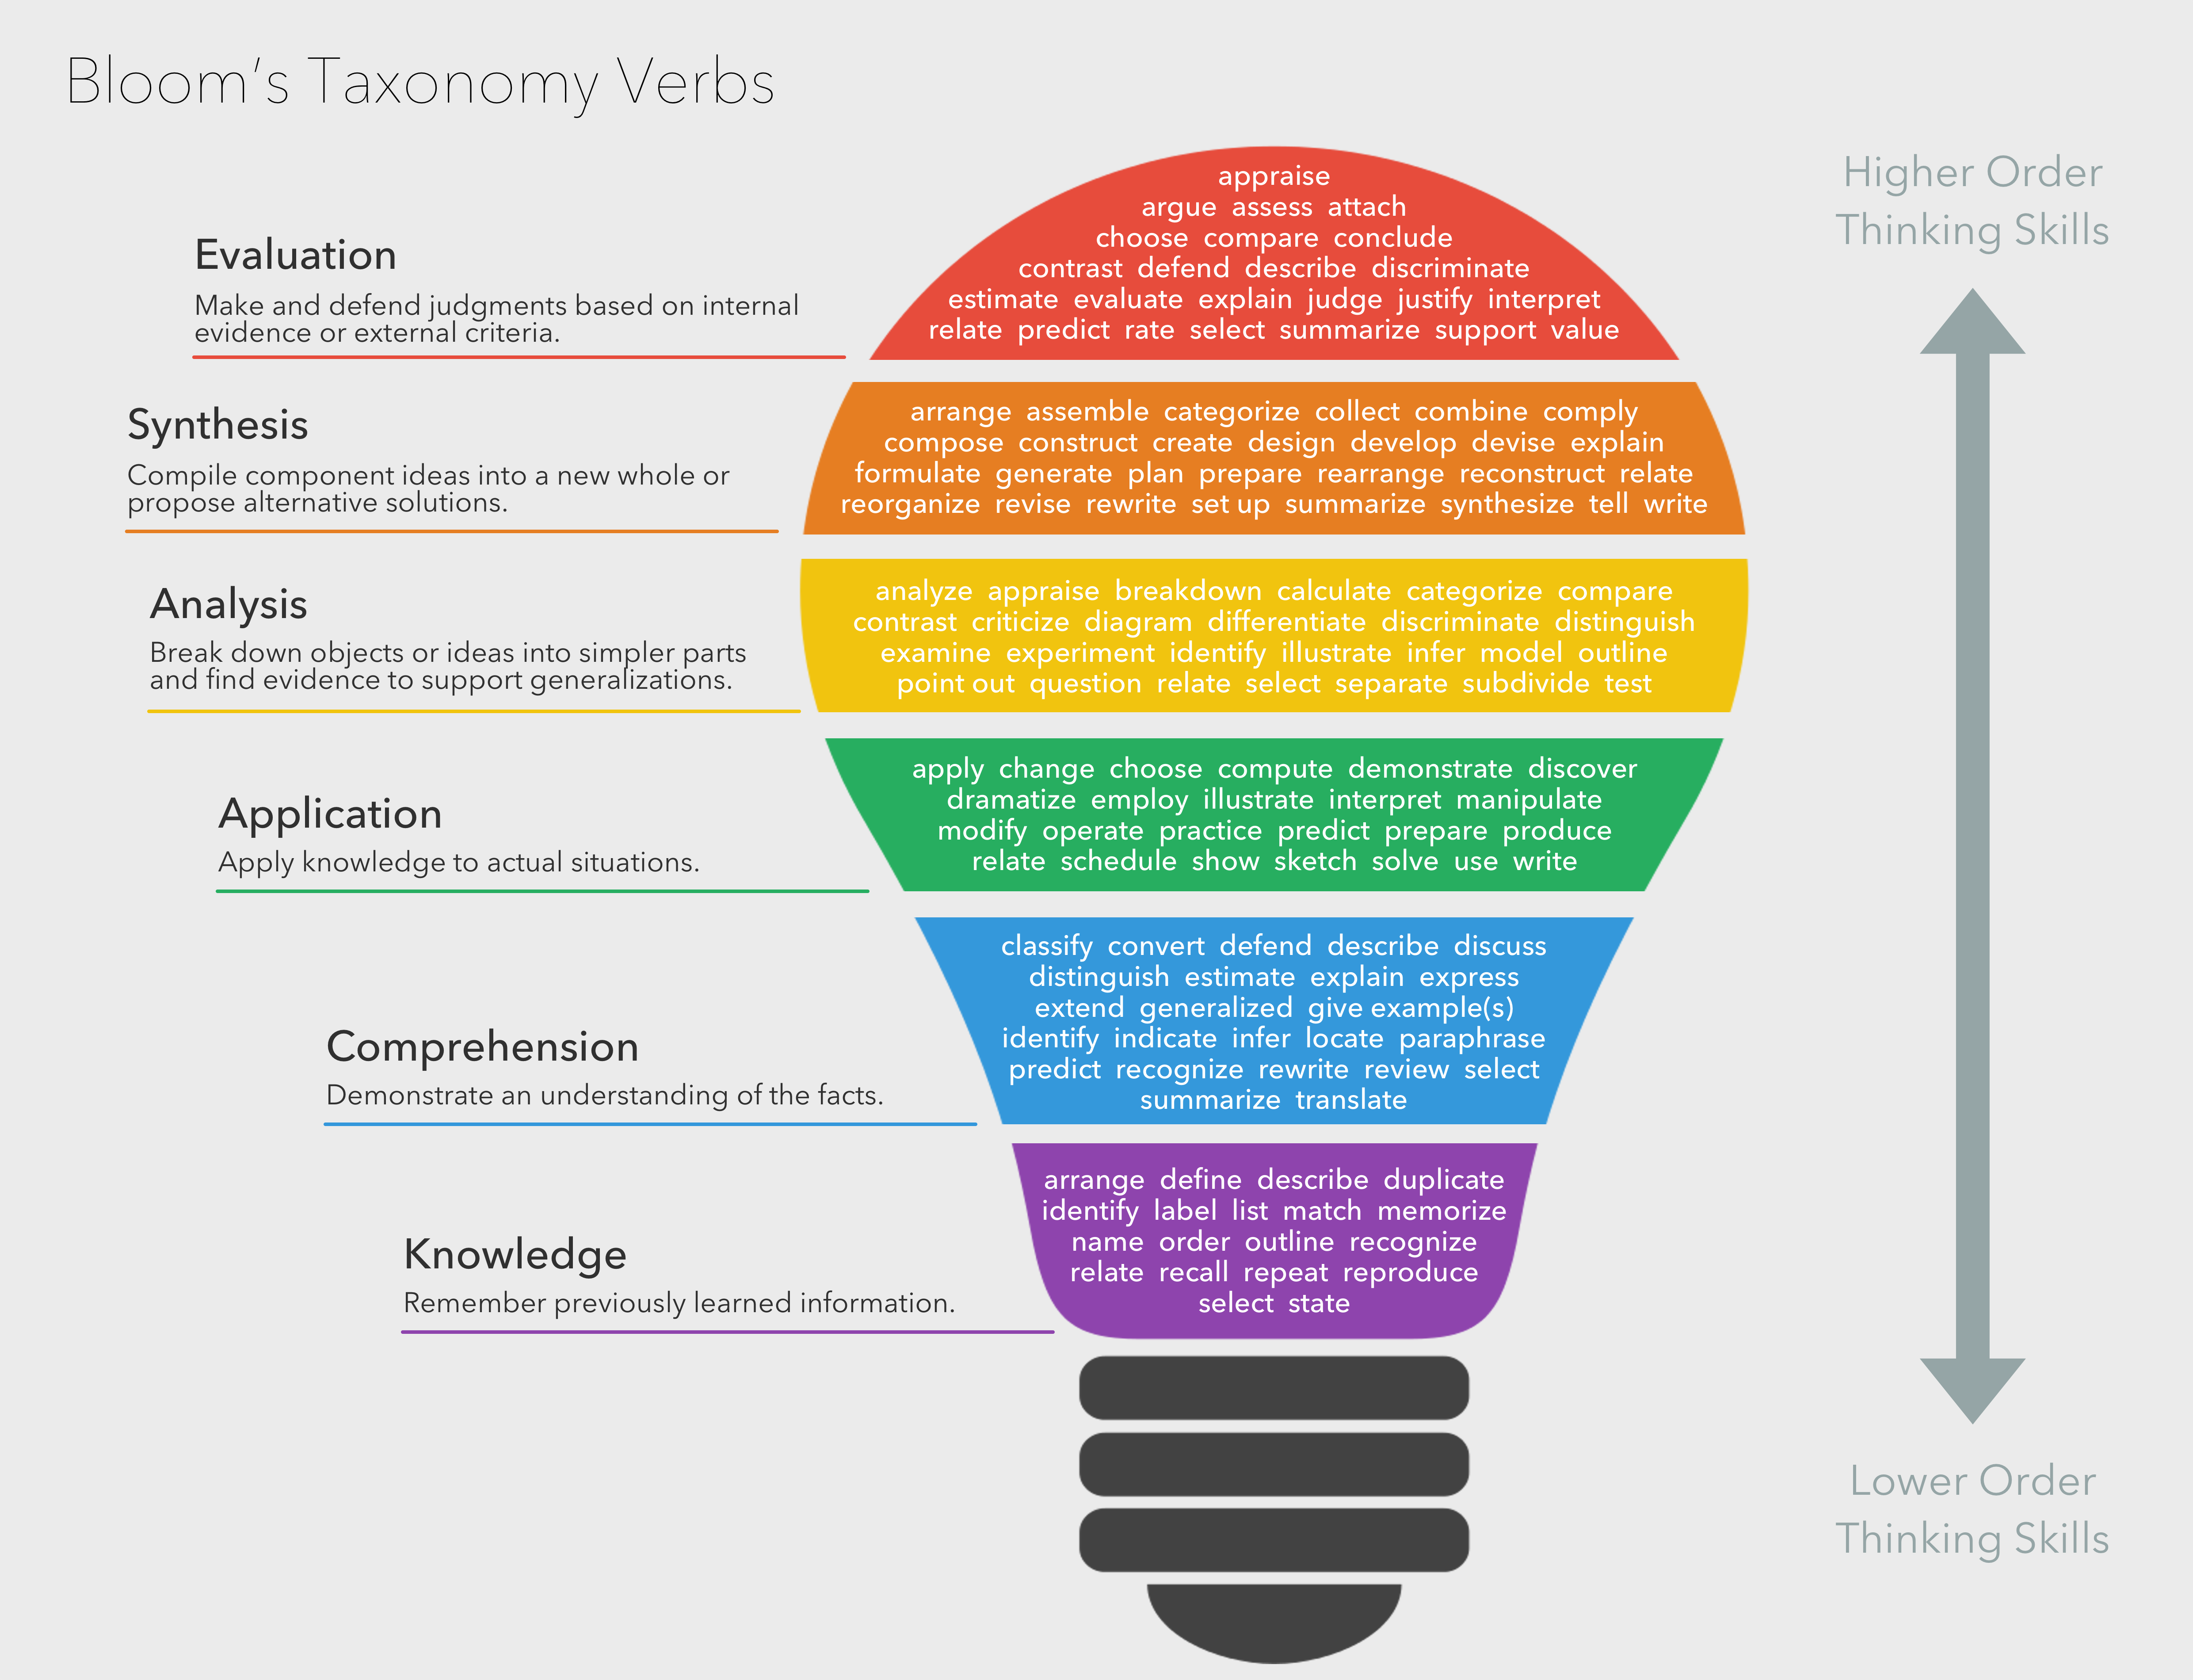 Blooms-taxonomy-verbs.png